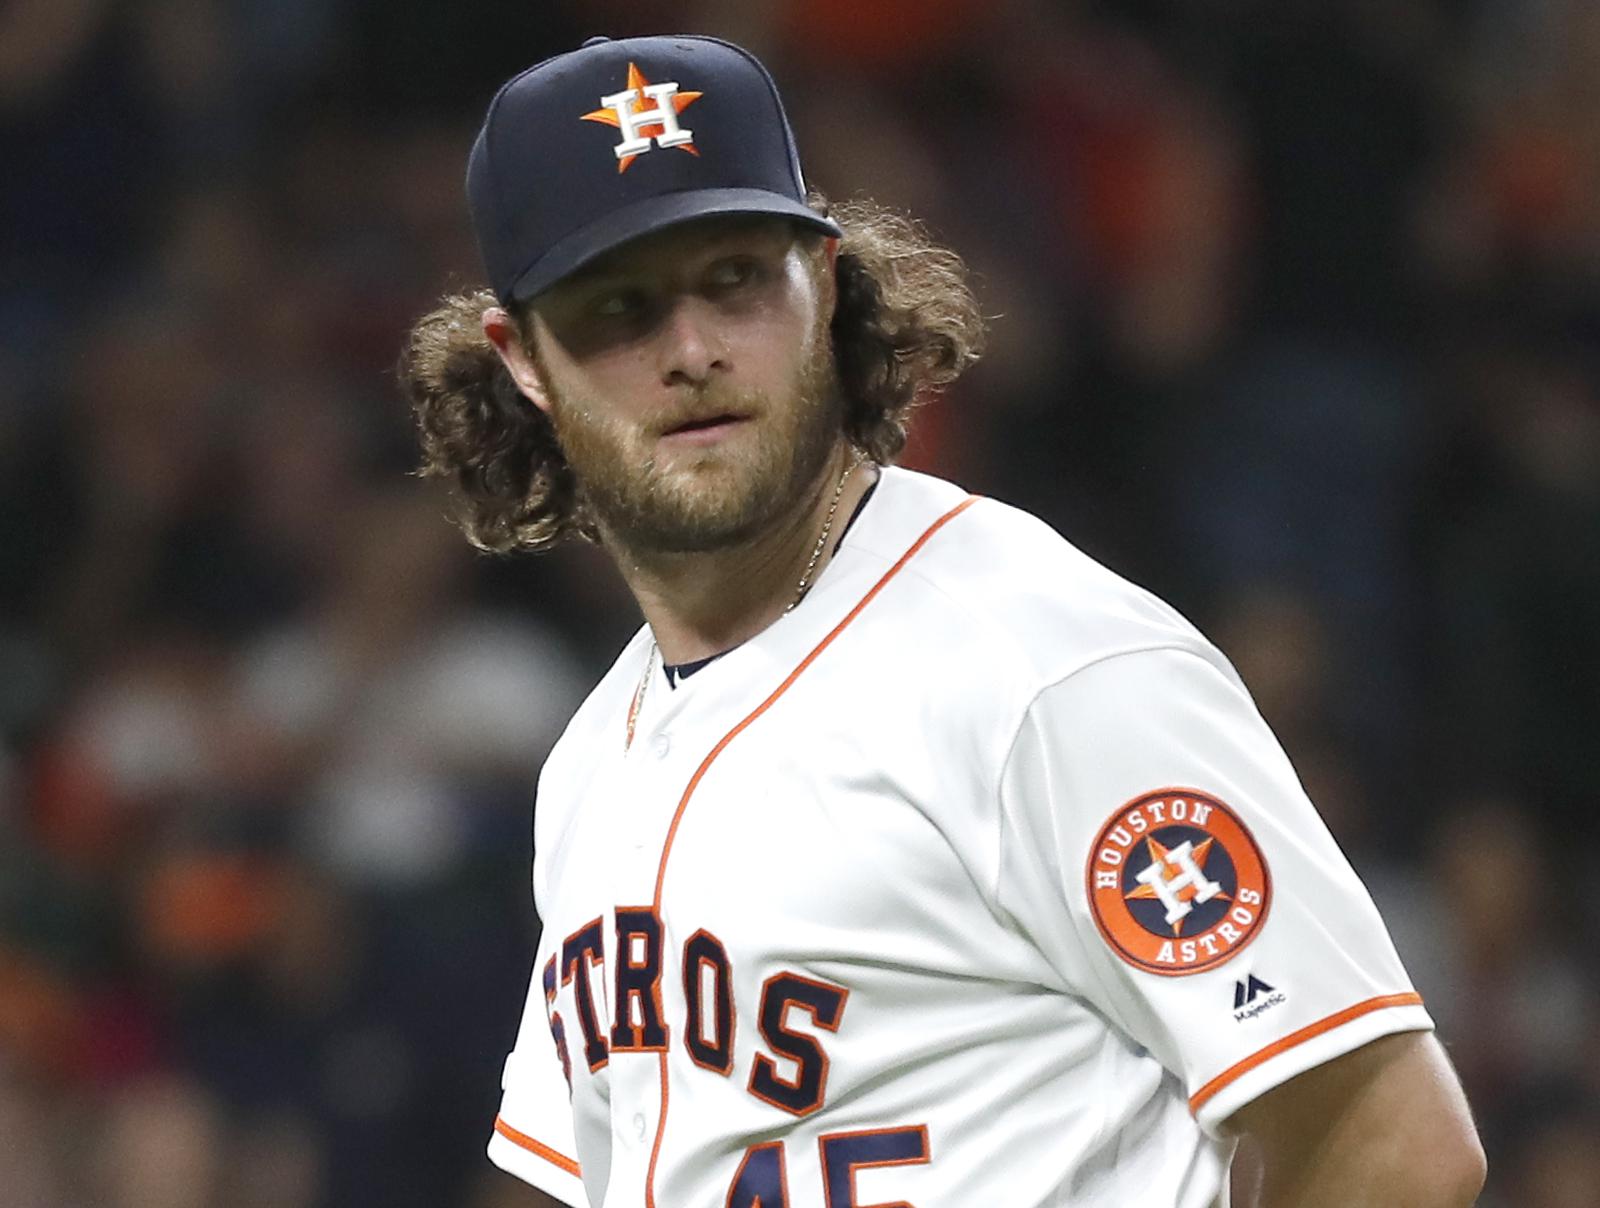 August 10, 2018: Houston Astros starting pitcher Gerrit Cole (45